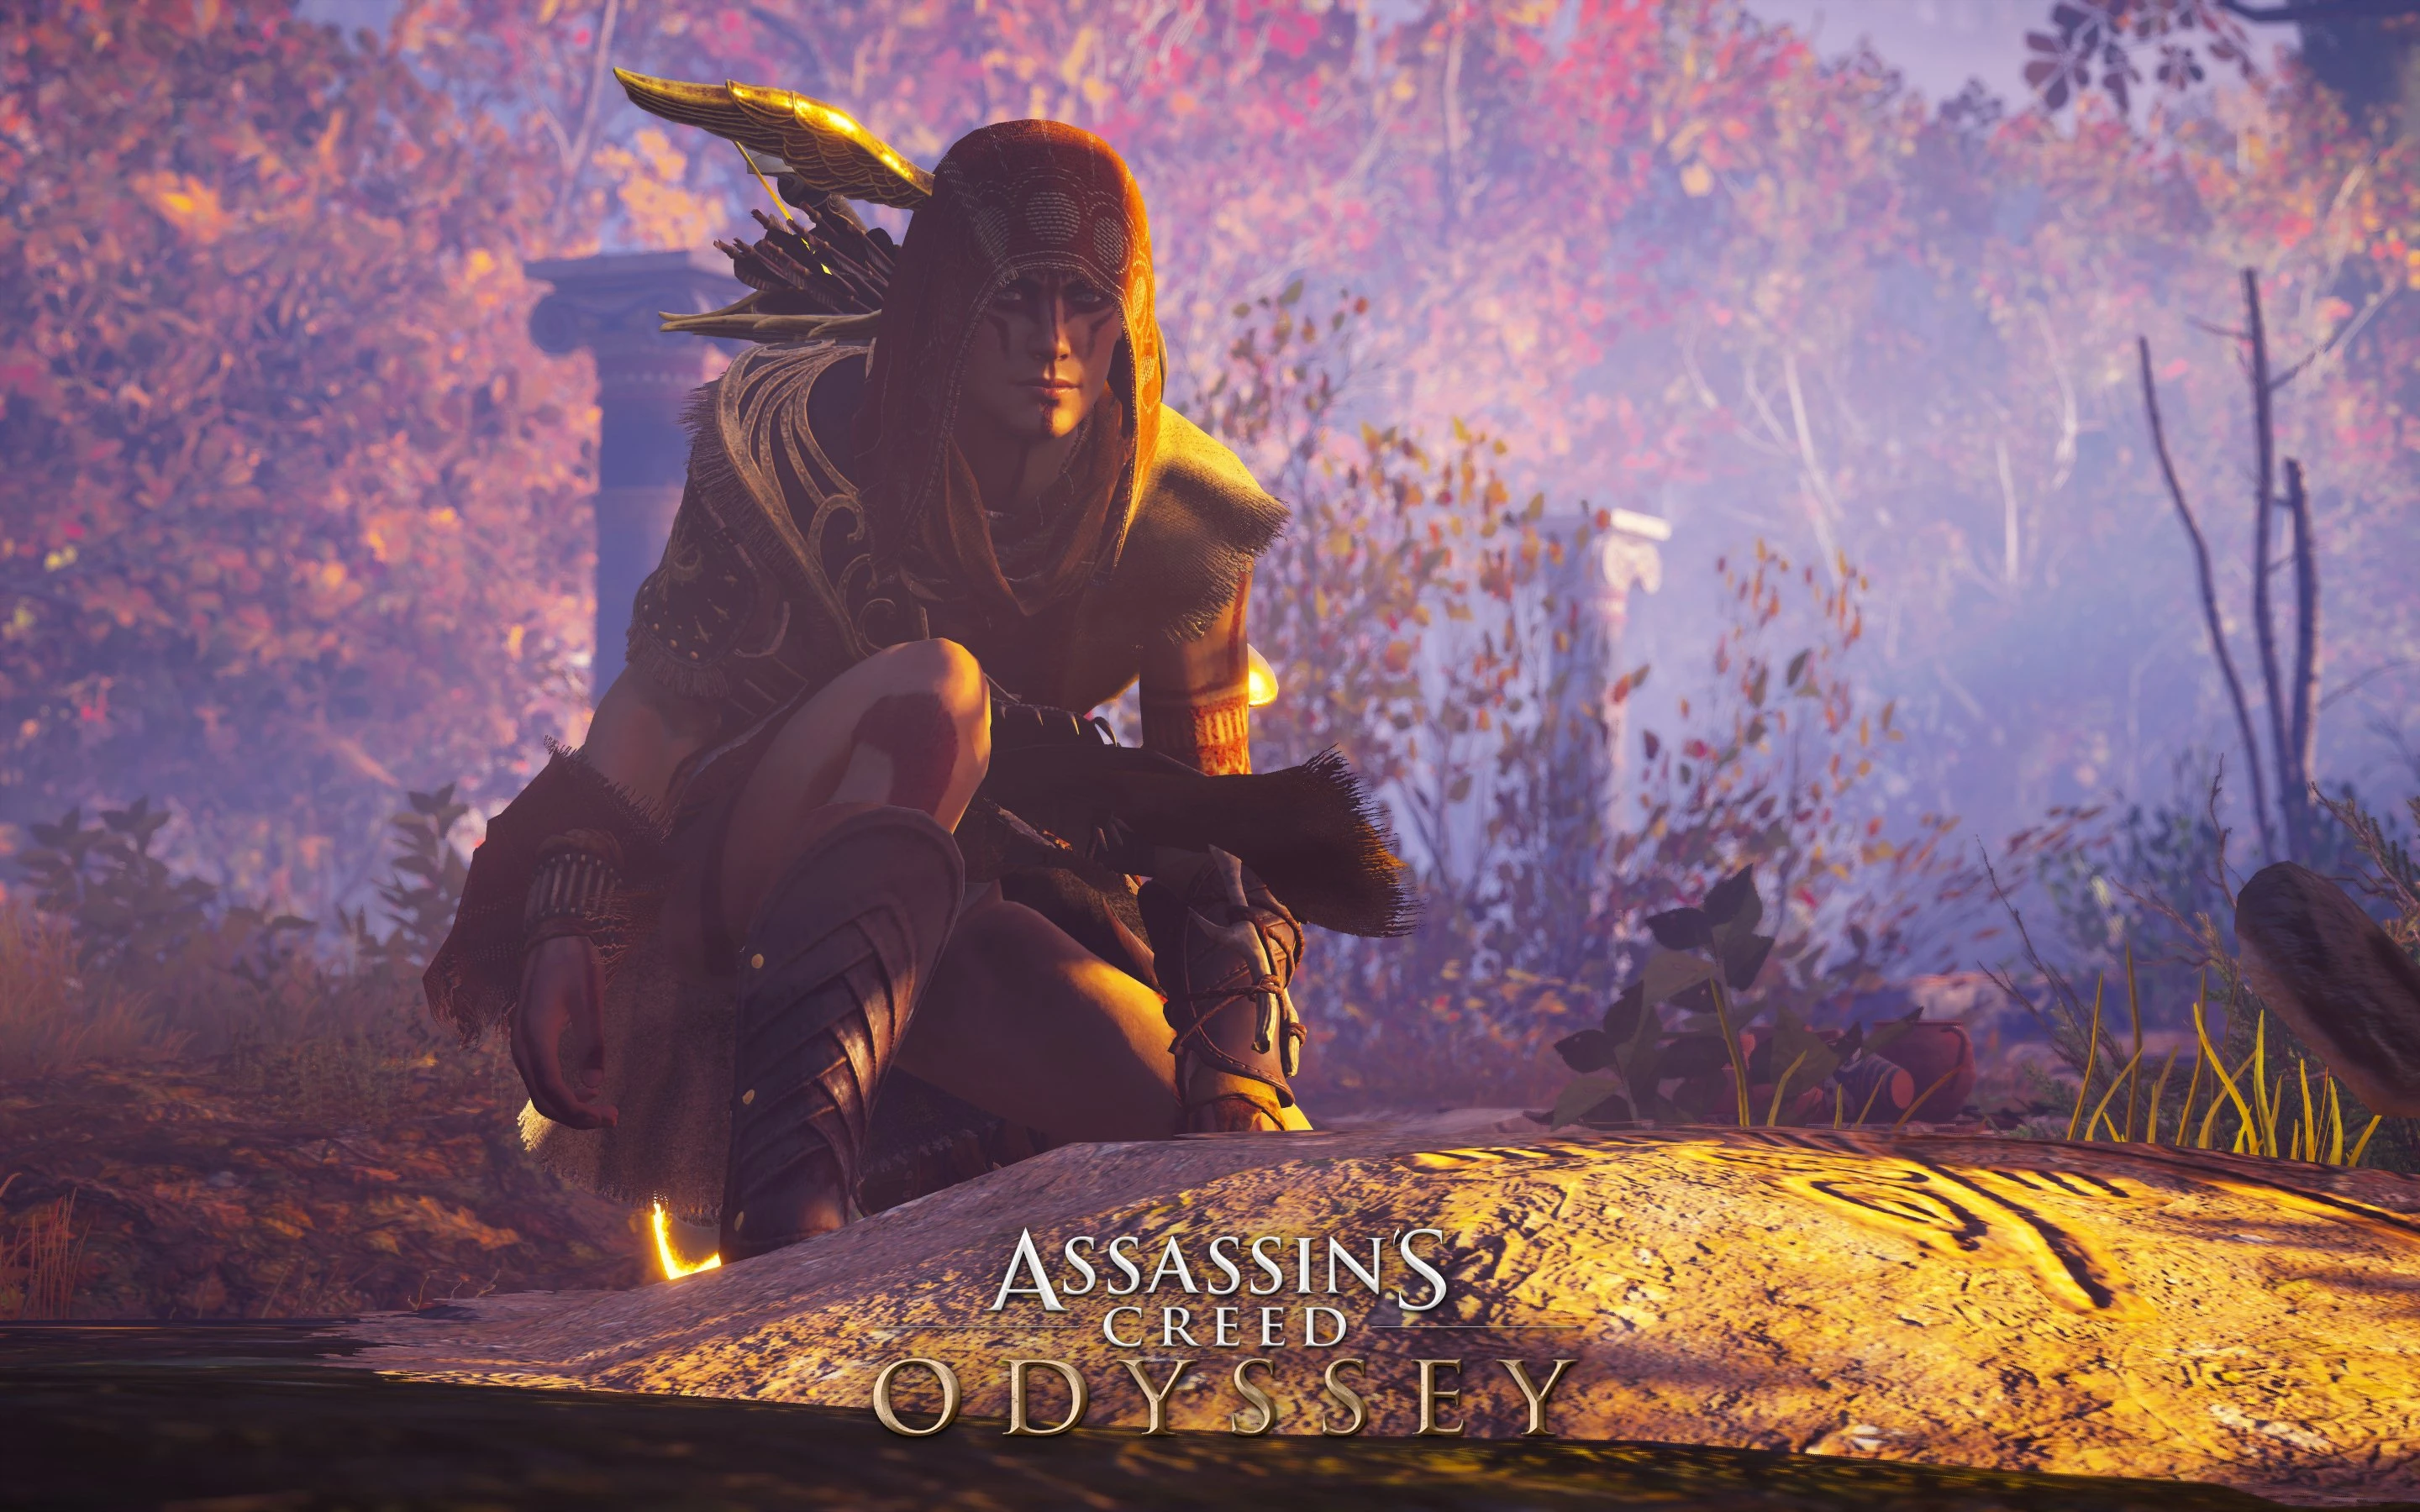 Different Skirts for Kassandra at Assassins Creed Odyssey 